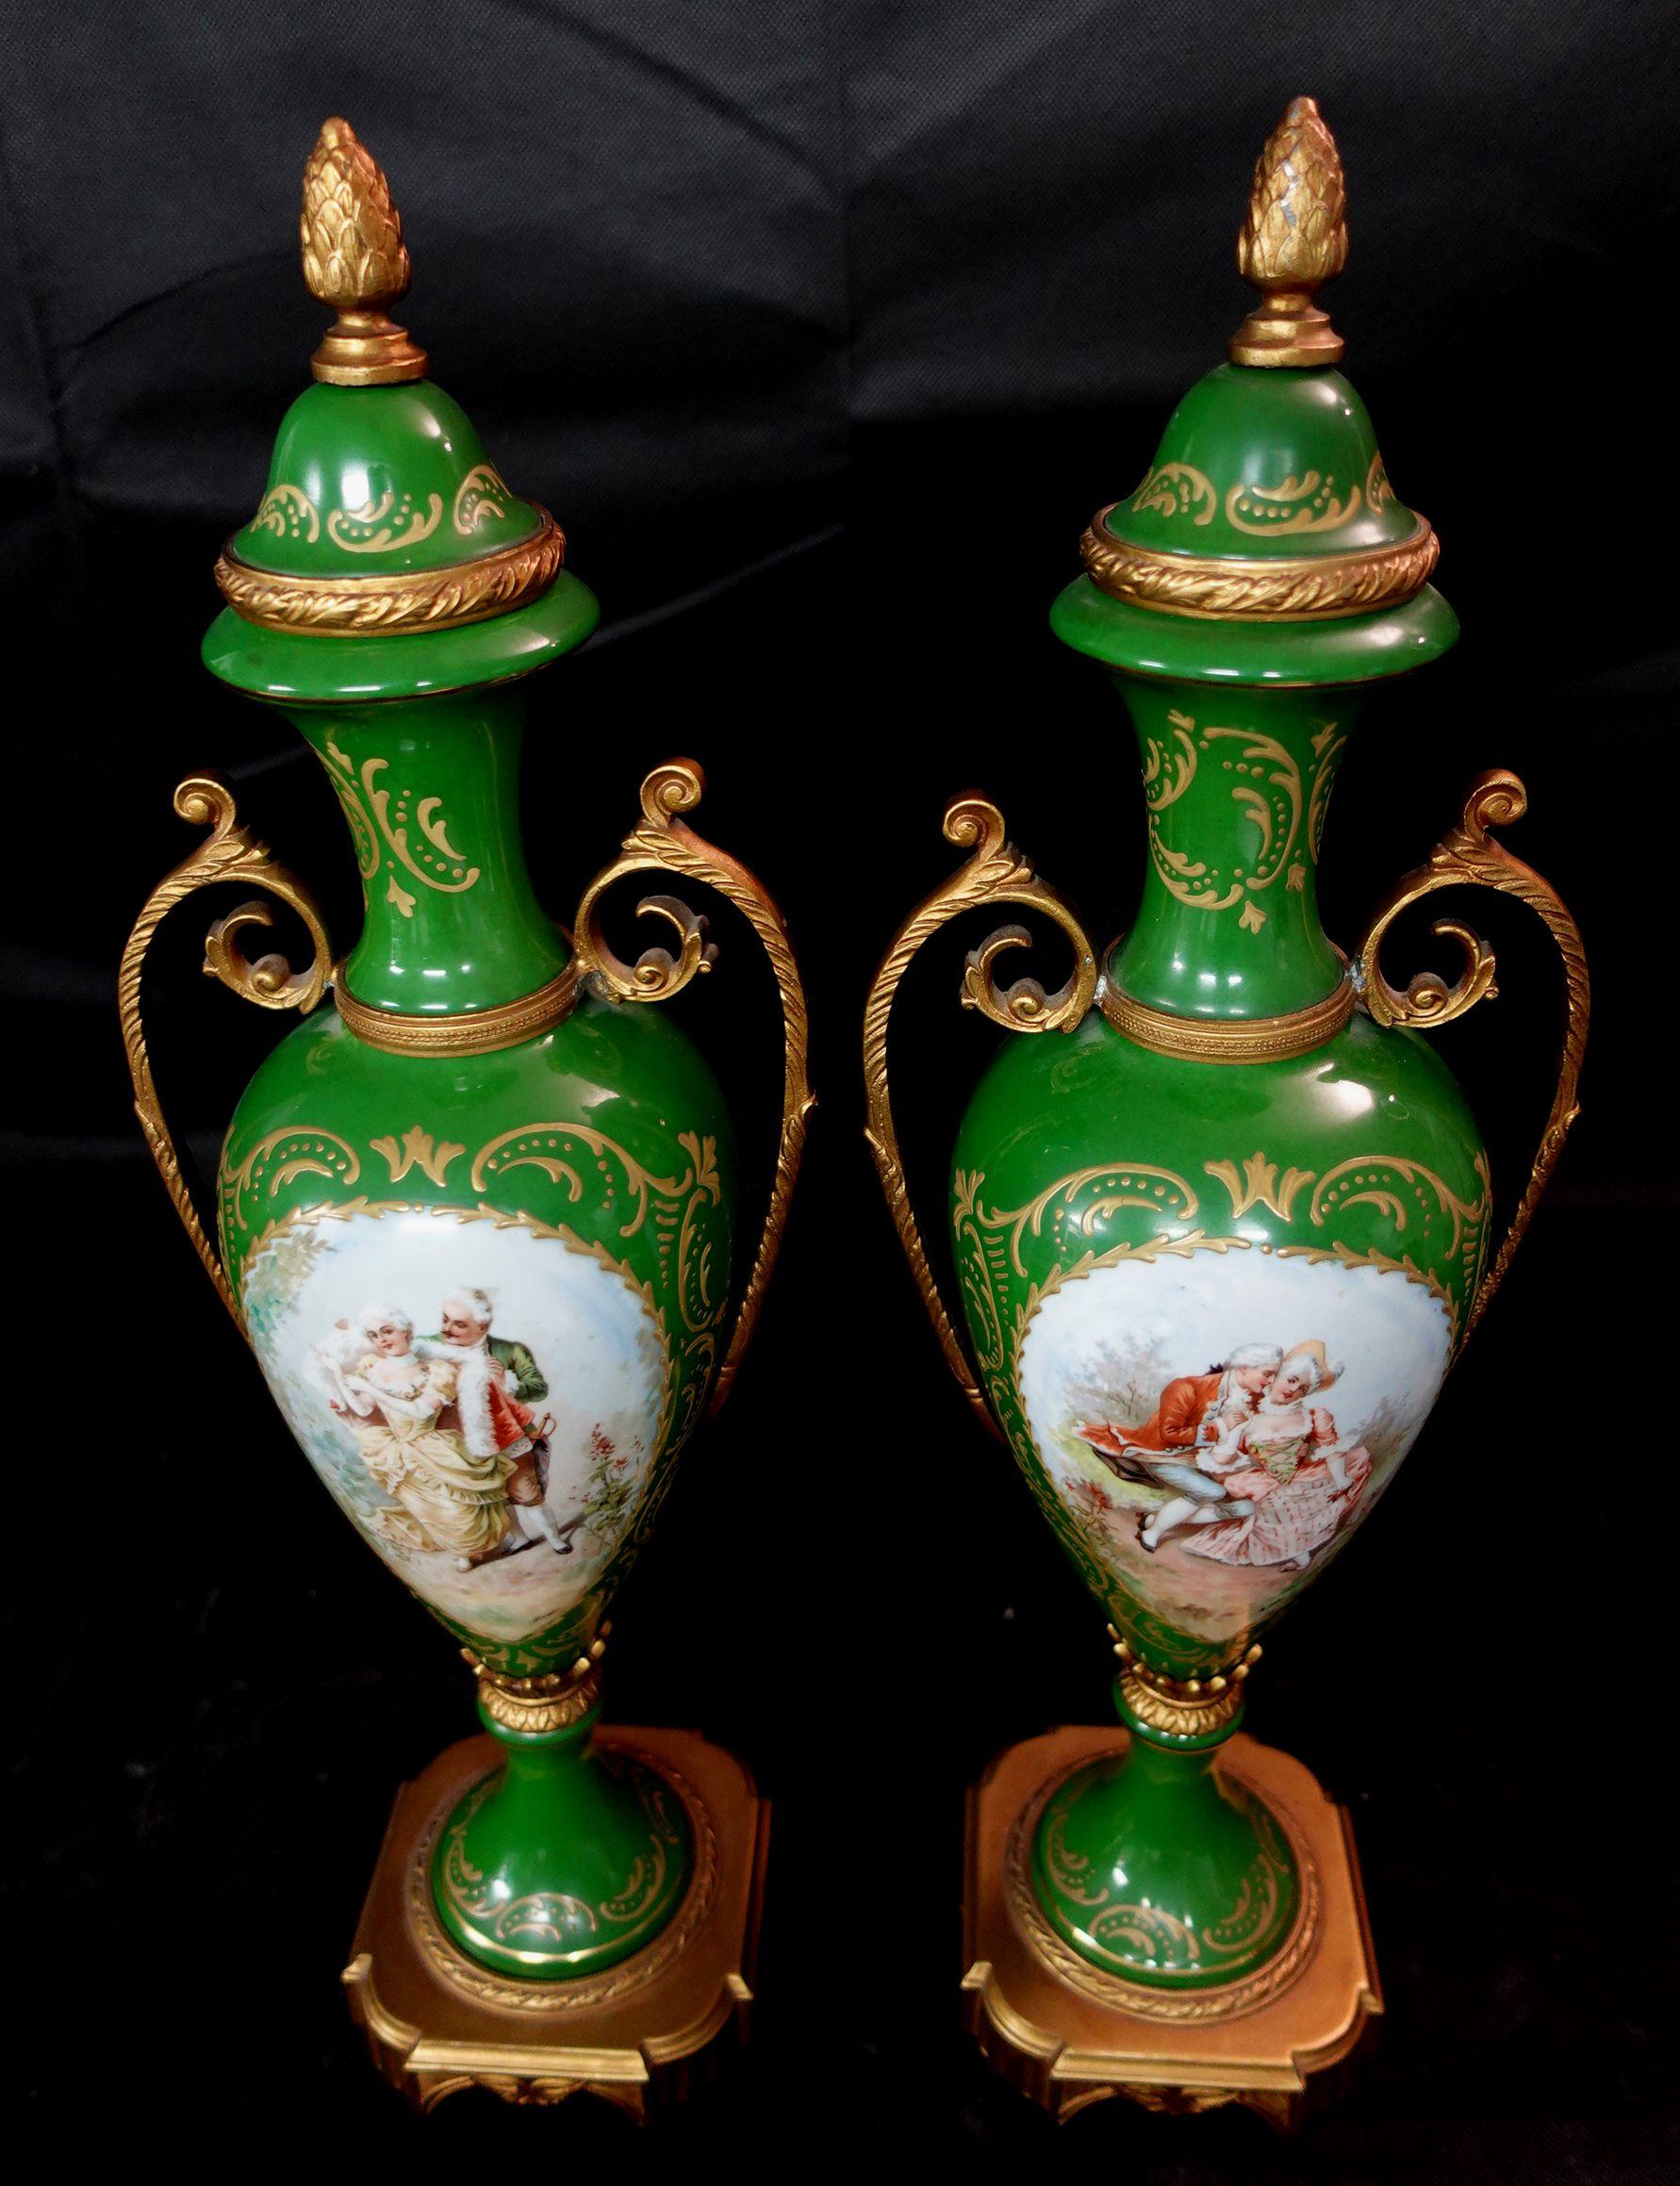 Antique 19th Matching Green Bolted Urns with Amorous Cenes, Ric00021 In Good Condition For Sale In Norton, MA